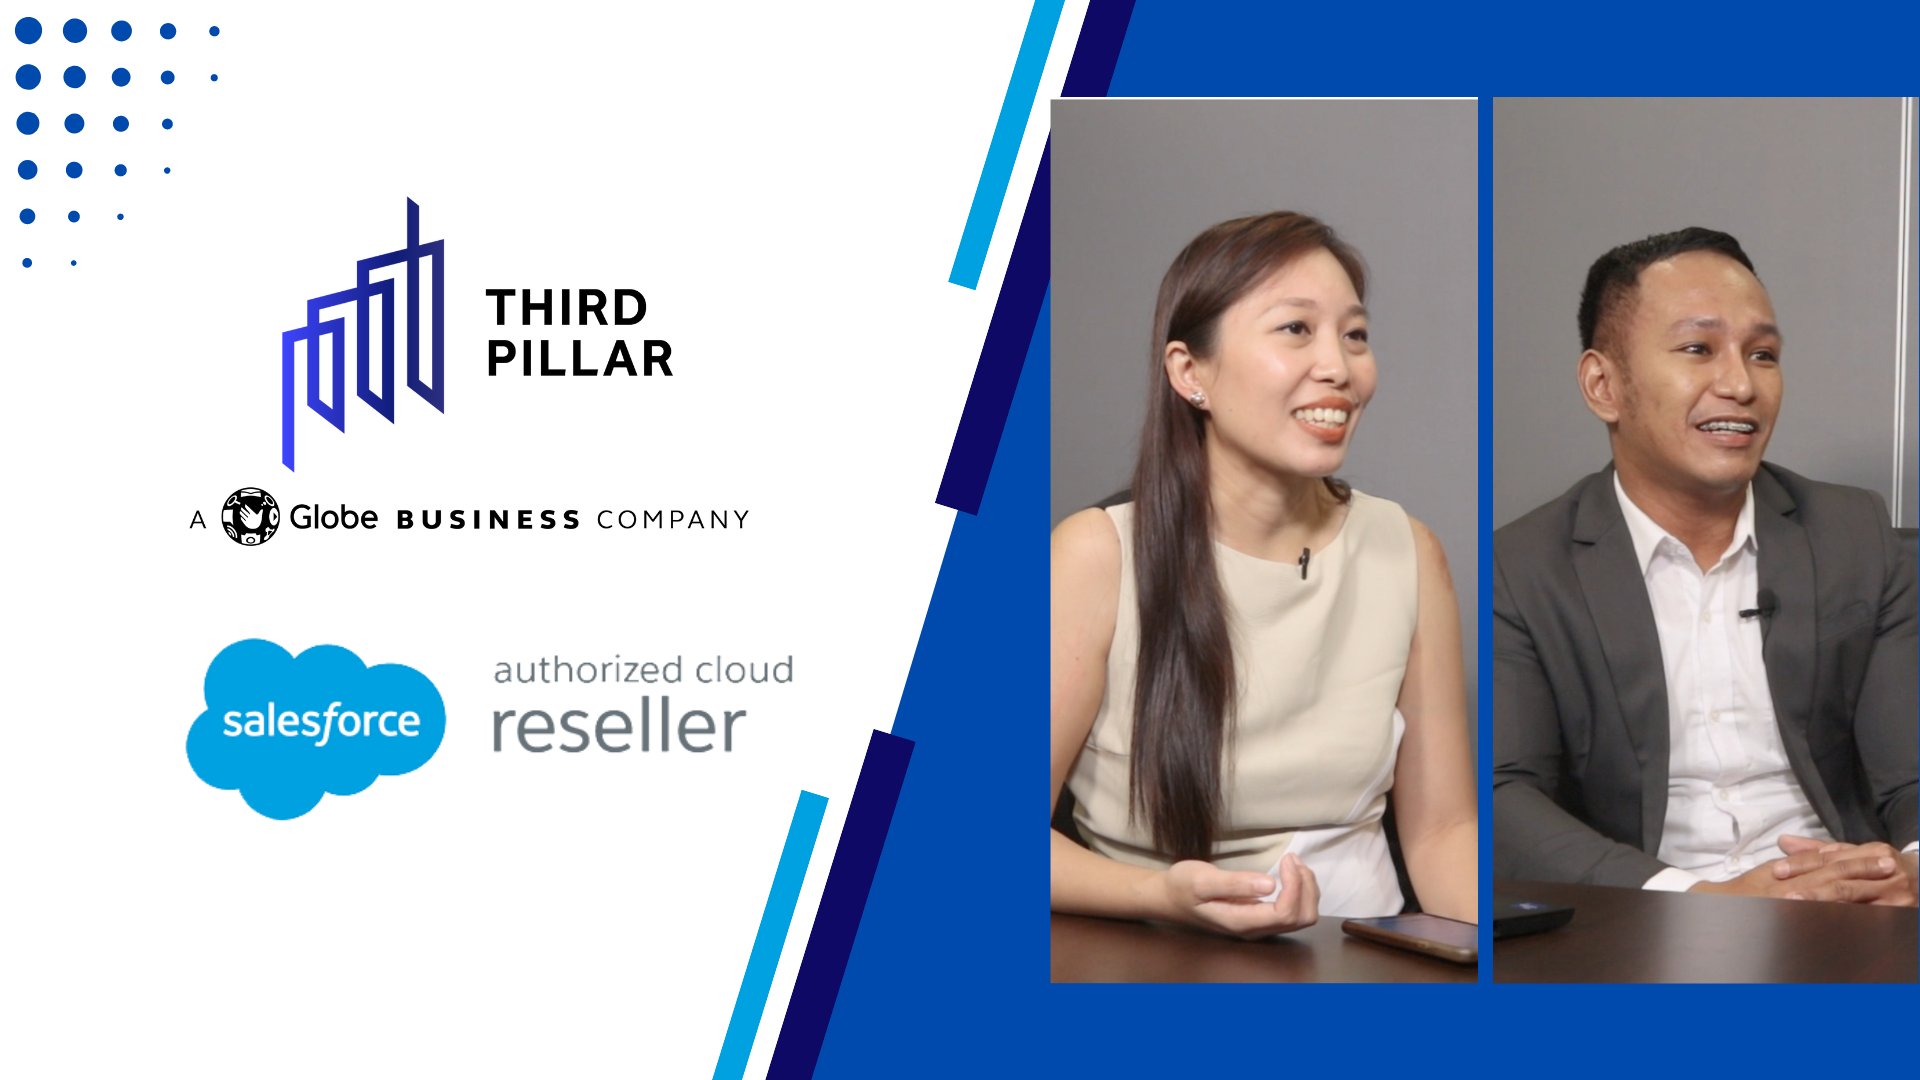 Third Pillar Enables PETNET, Inc. to Build Stronger Customer Relationships with Salesforce